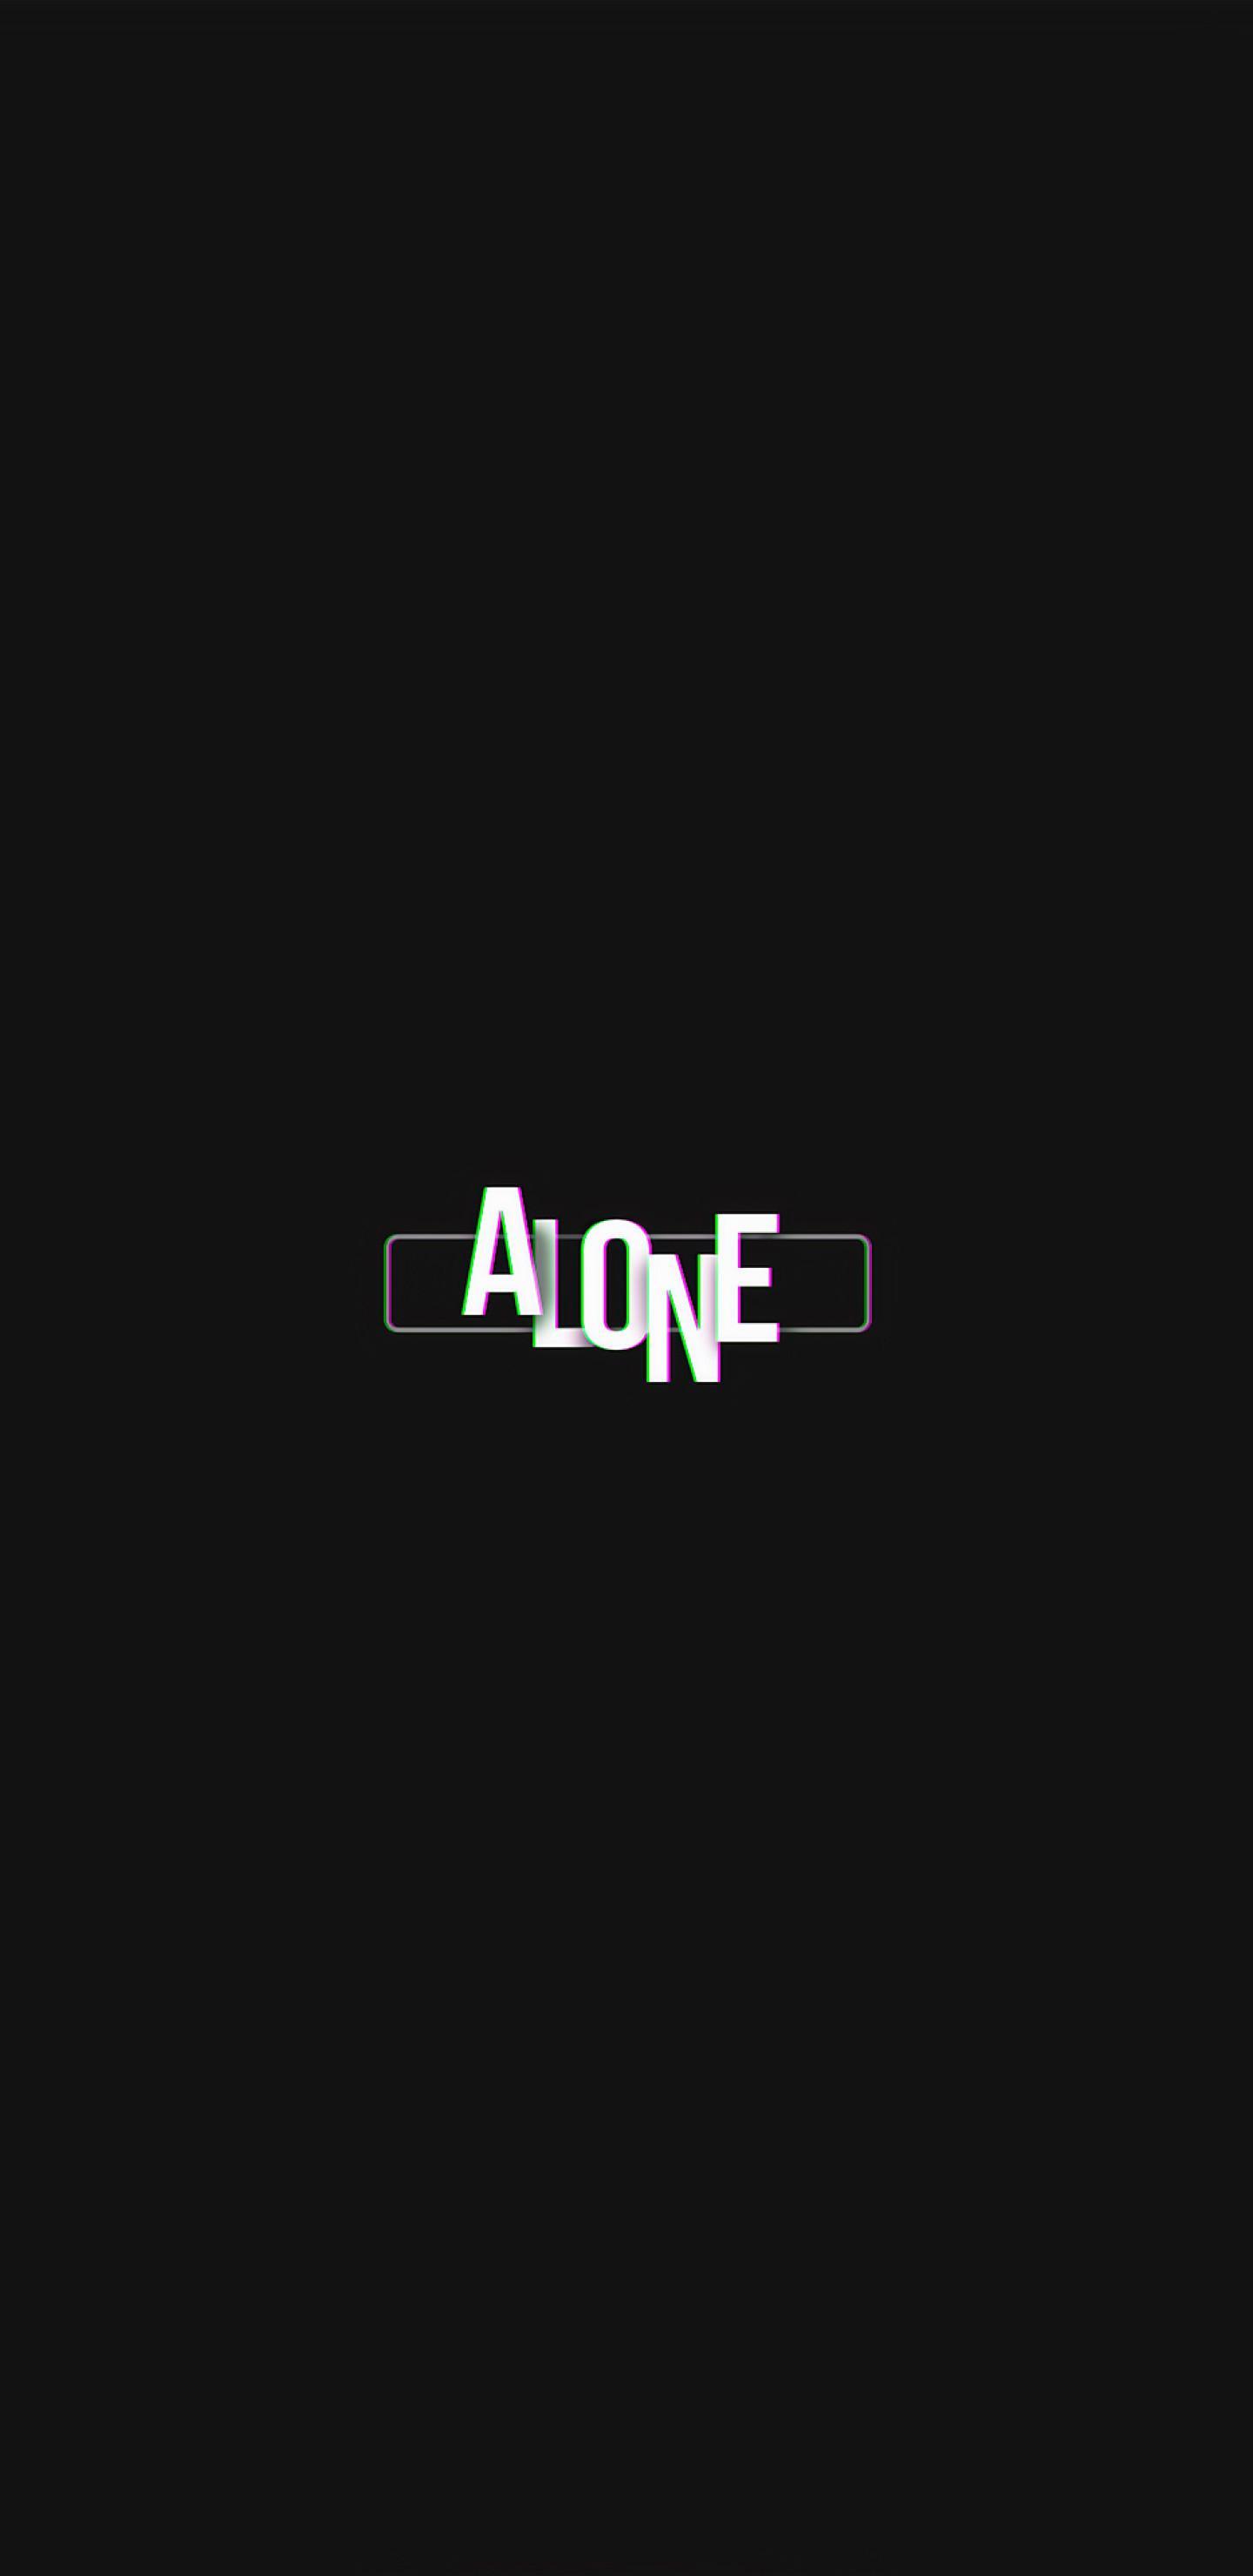 Black Alone Wallpapers - Top Free Black Alone Backgrounds - WallpaperAccess